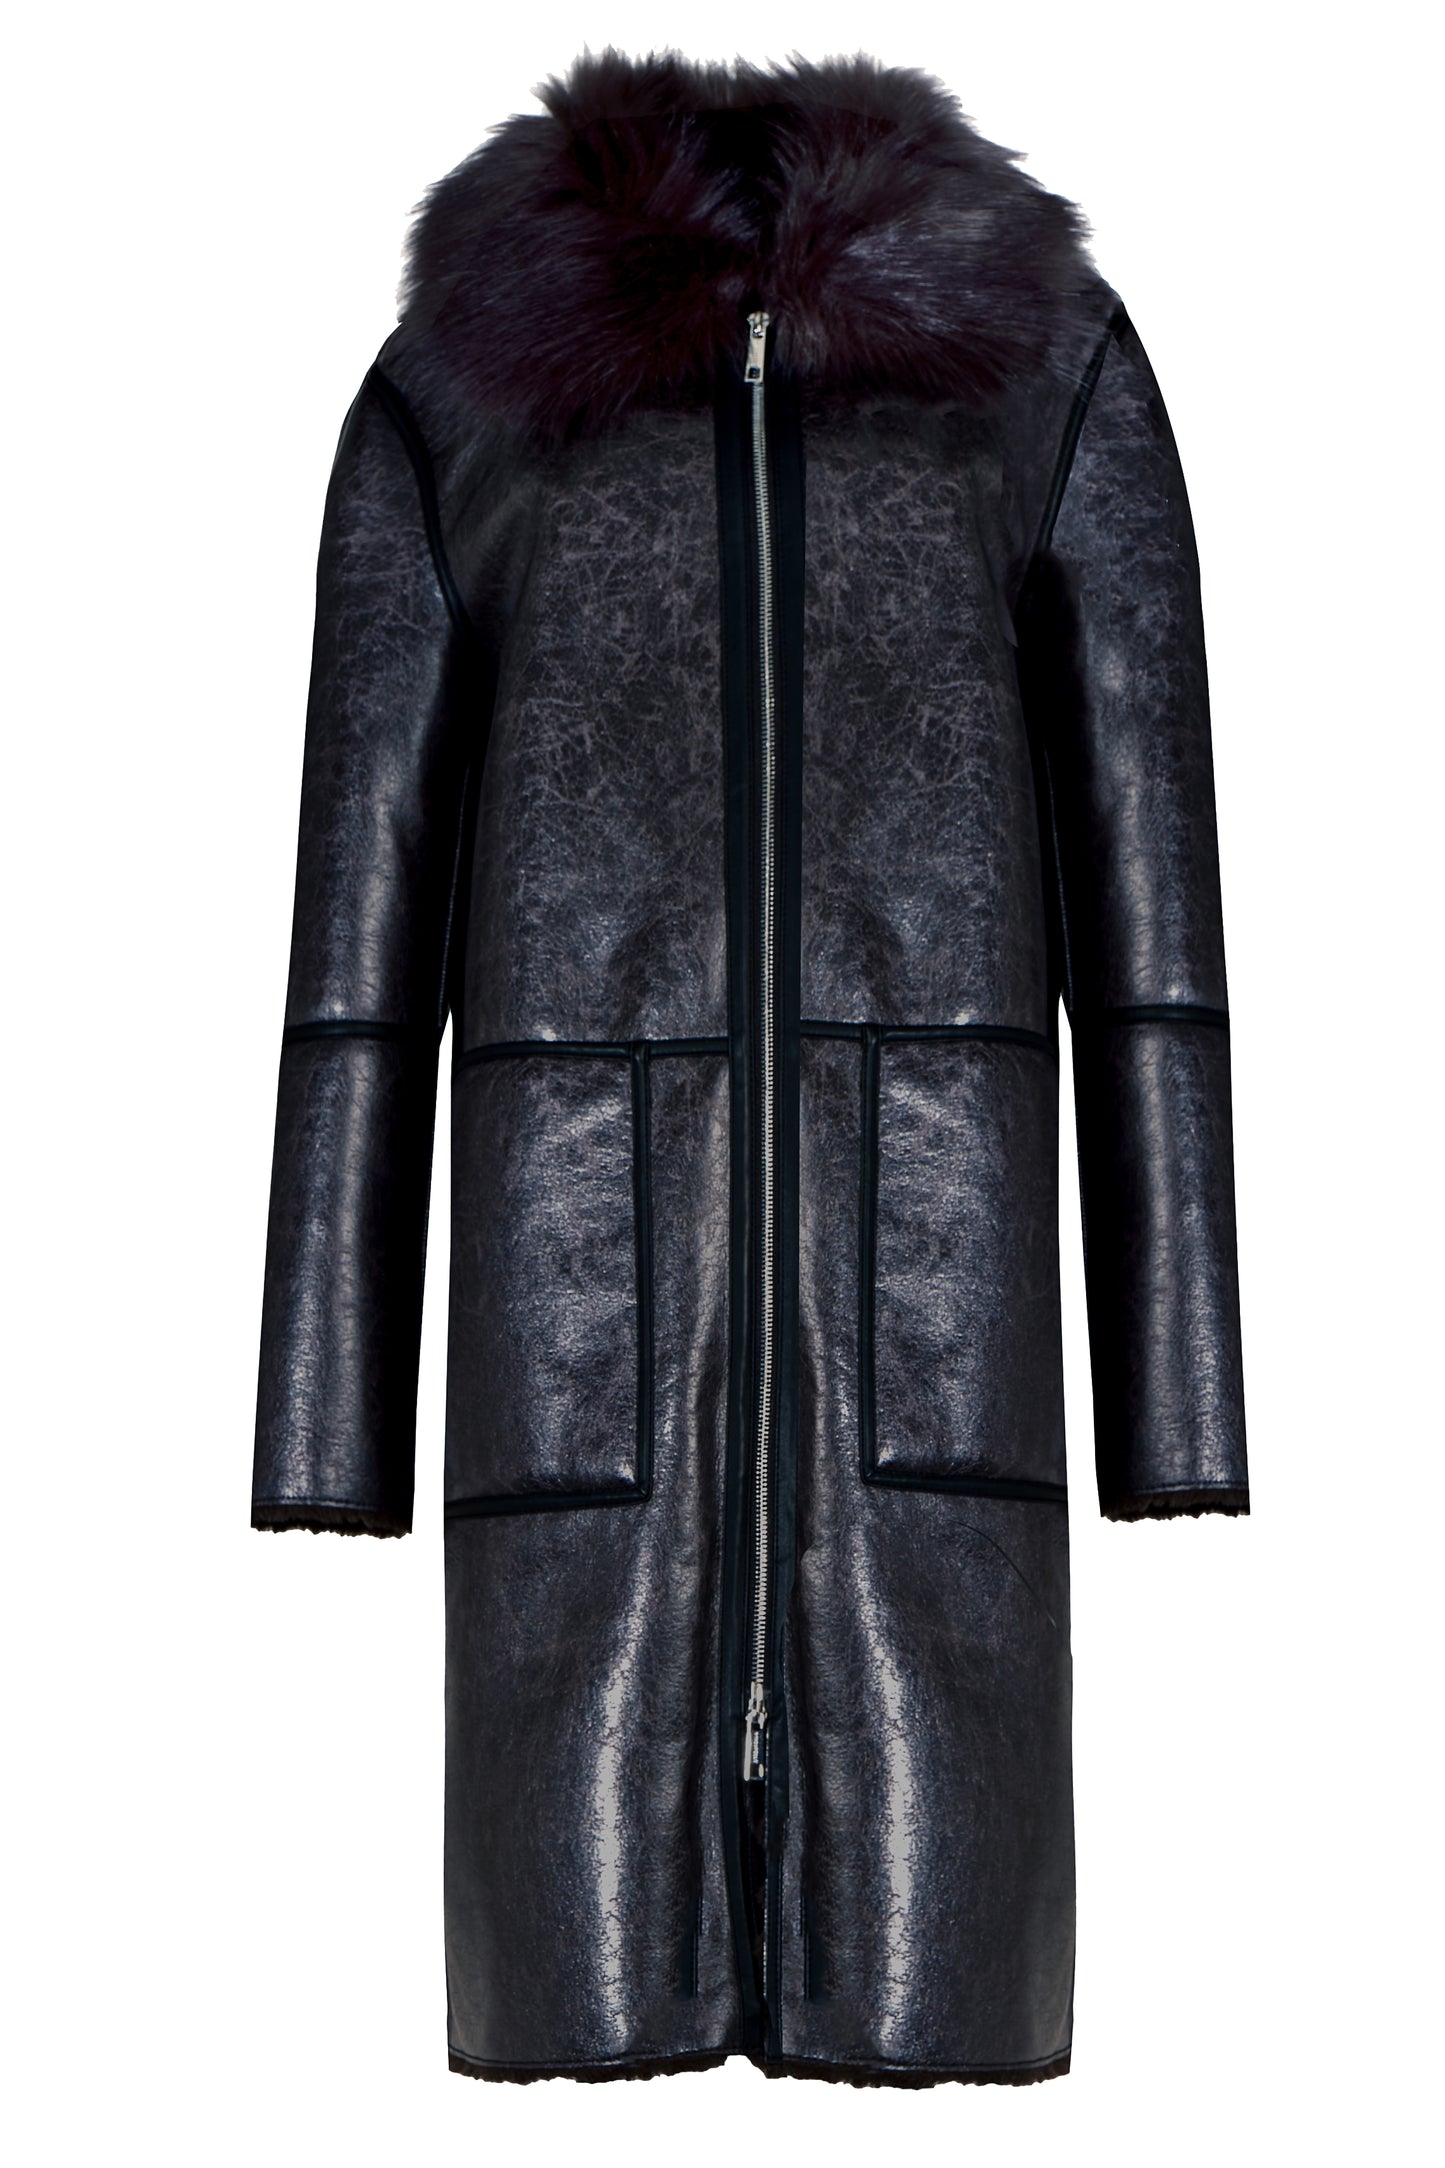 Iconic Fur-Lined Trench Coat